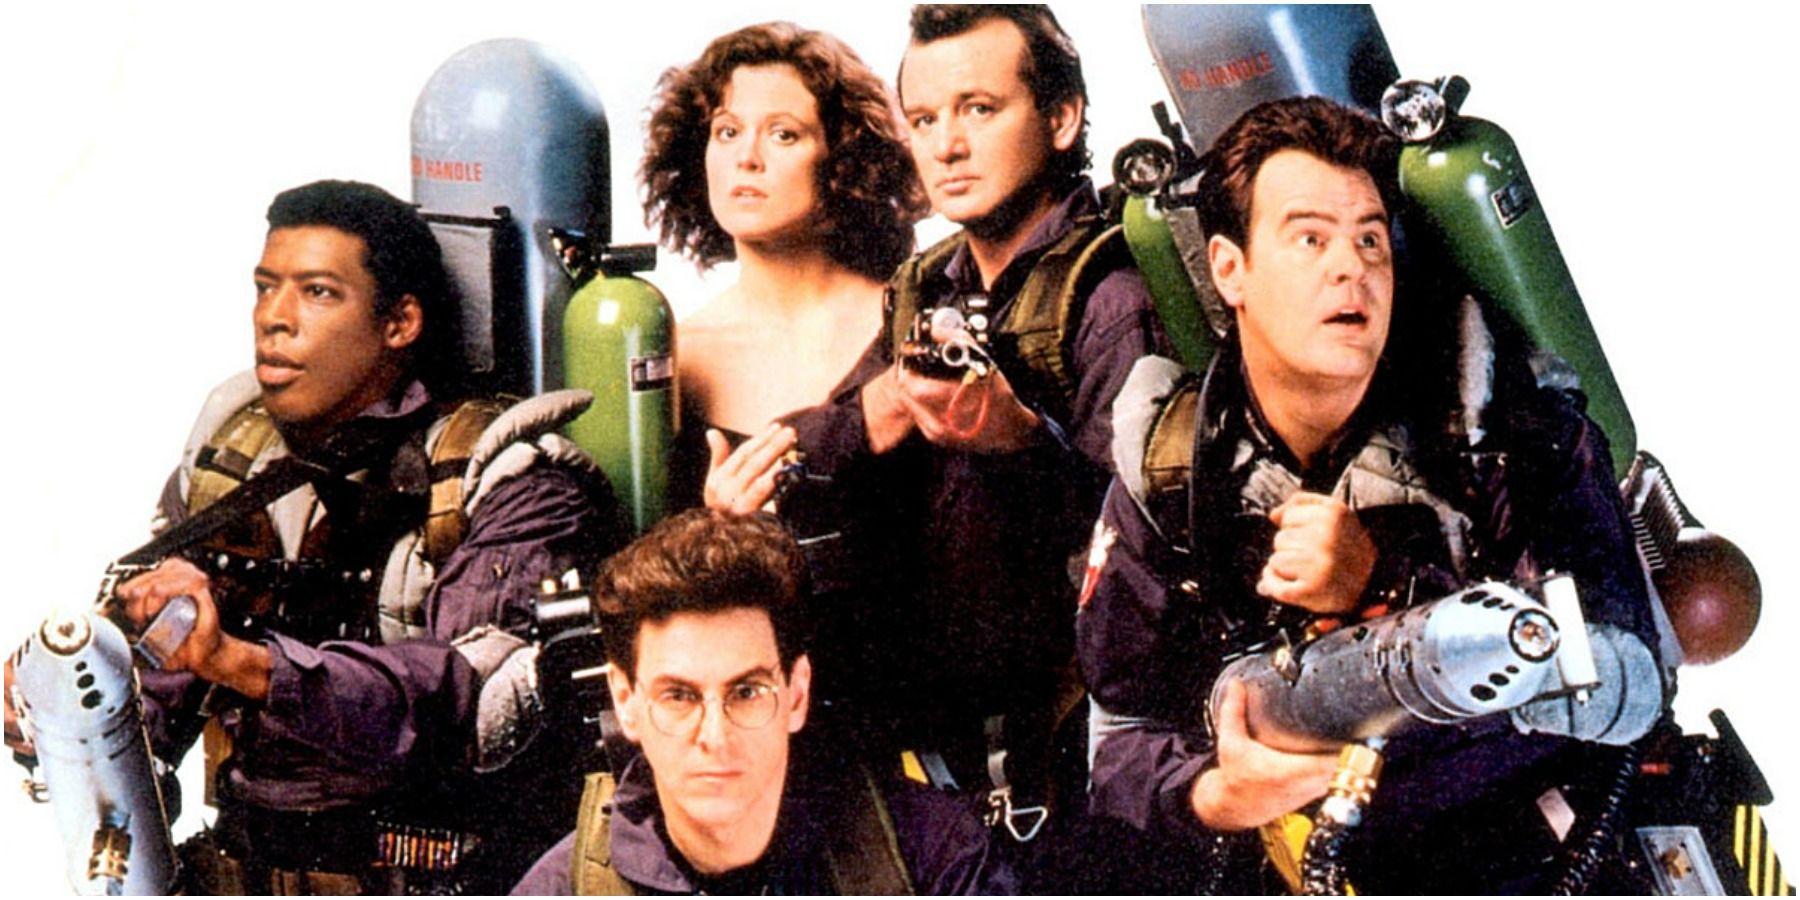 ghostbusters 2 main cast